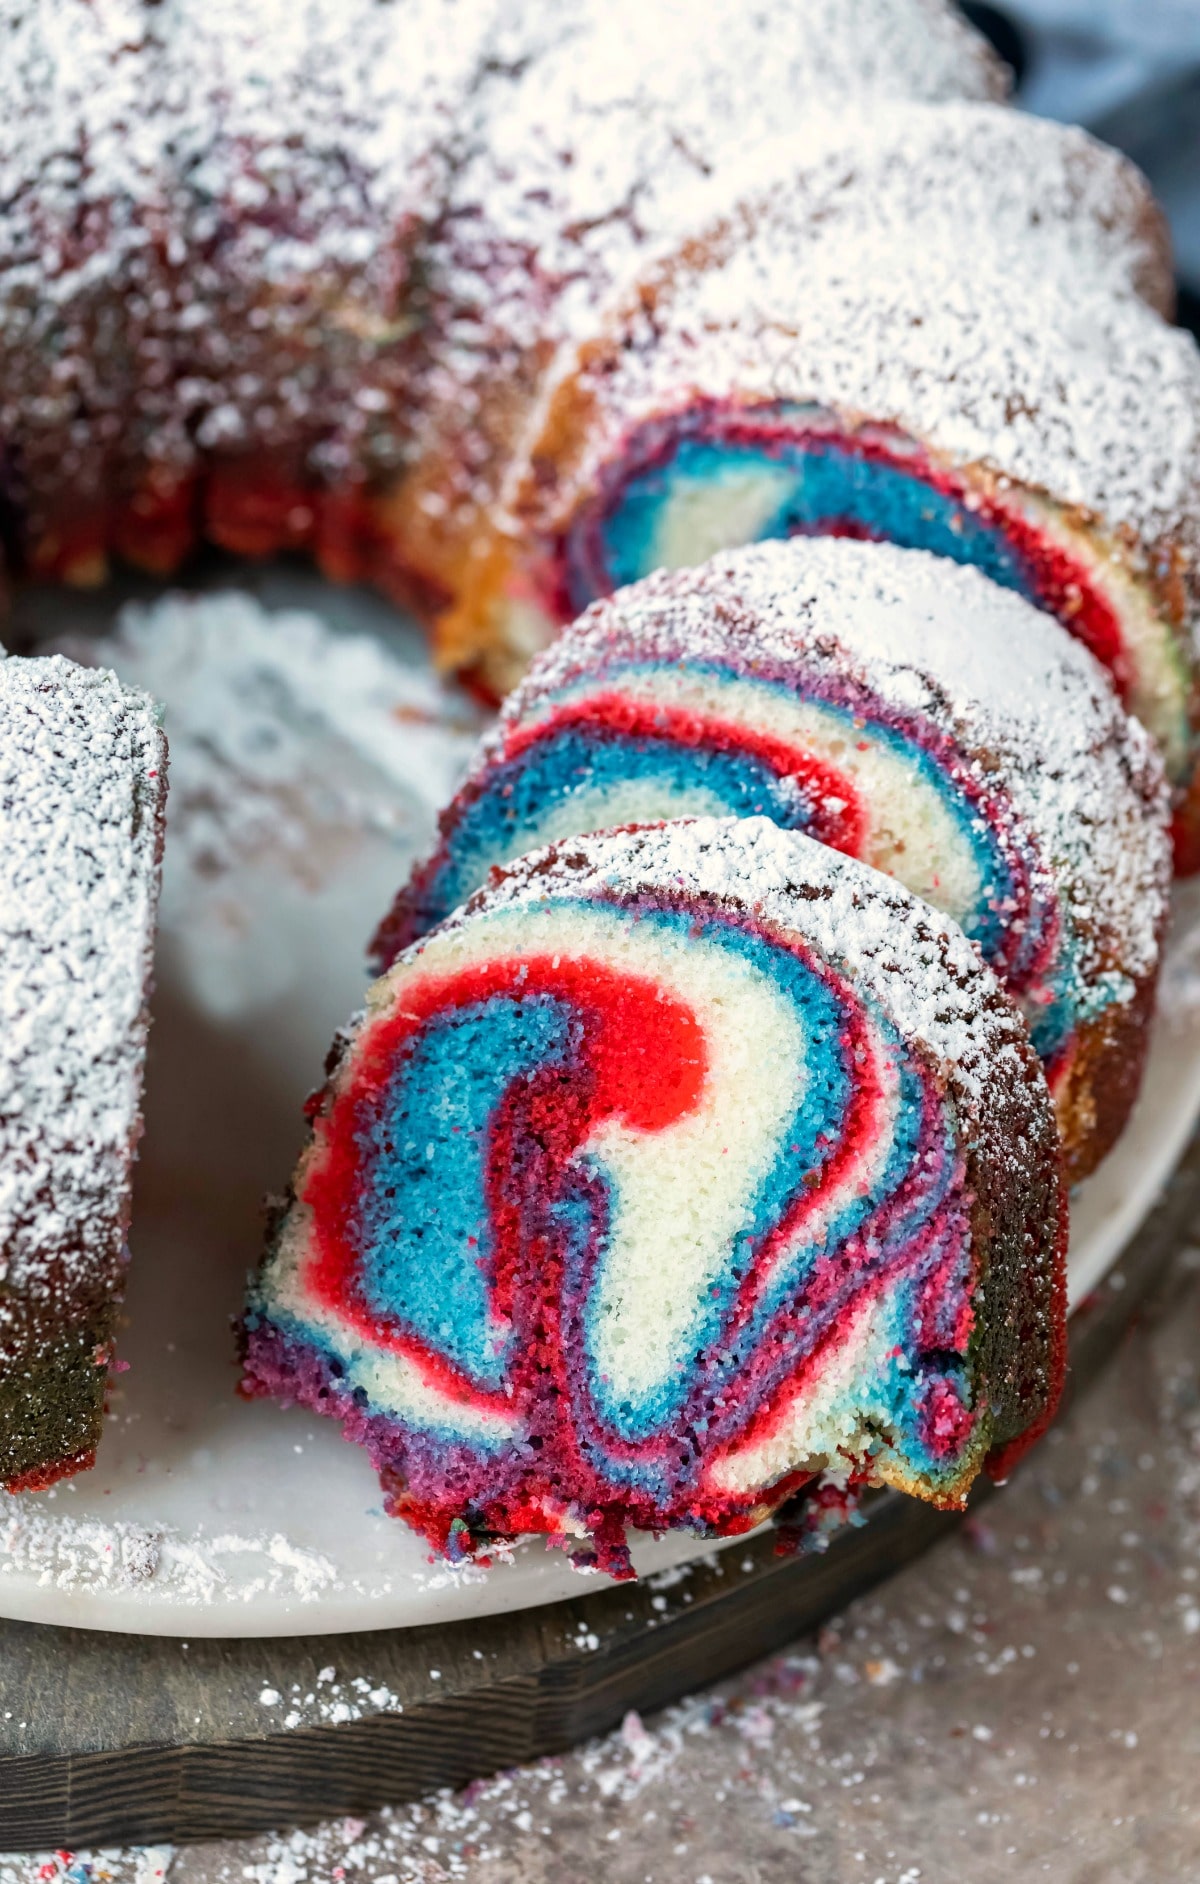 Slices of red, white, and blue marble cake on a cake platter